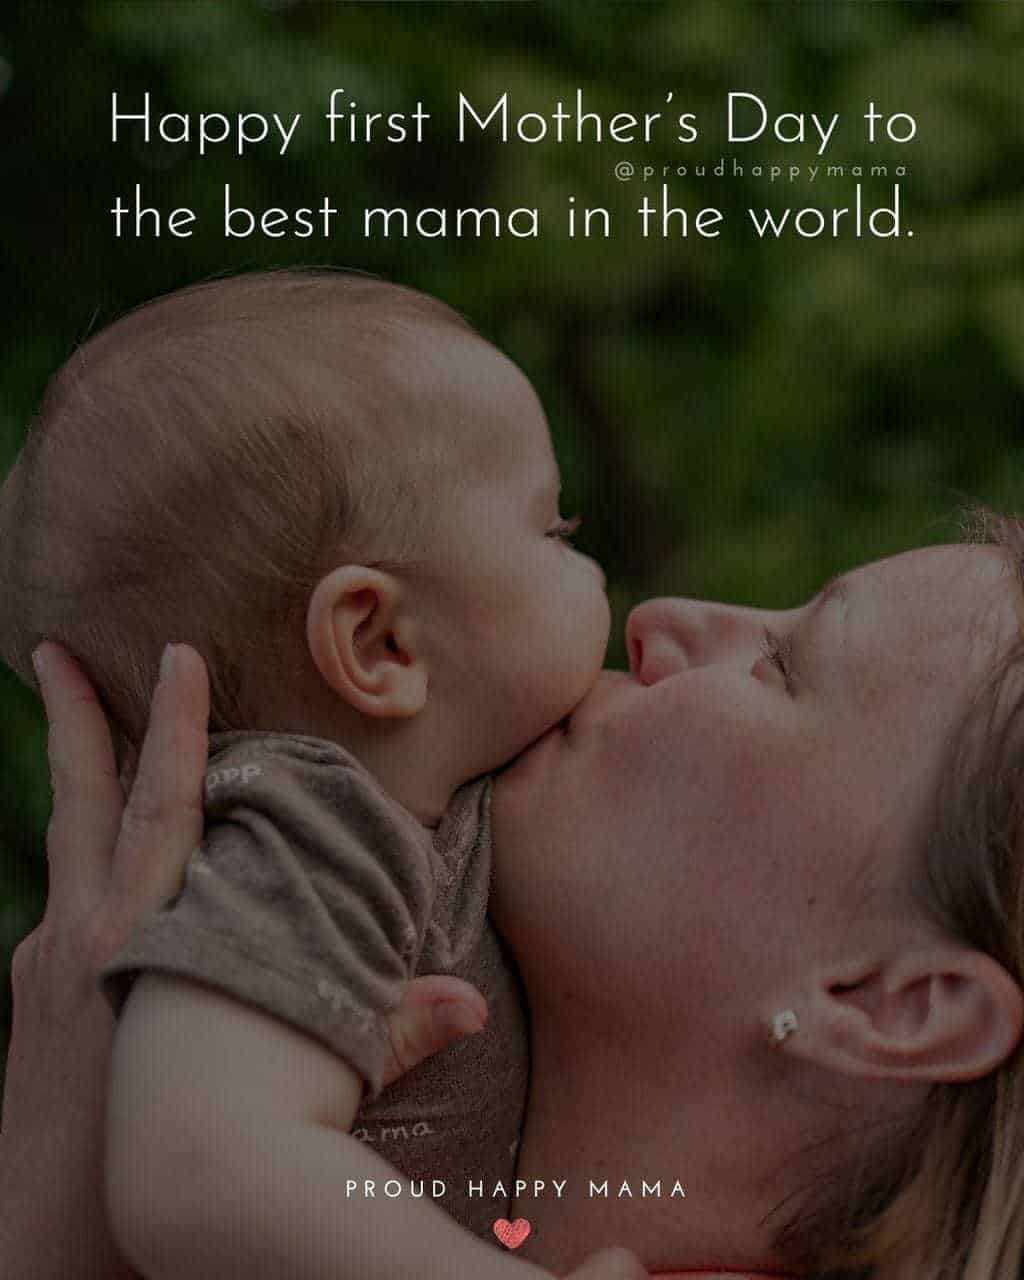 First Mothers Day Quotes - Happy first Mother’s Day to the best mama in the world.’